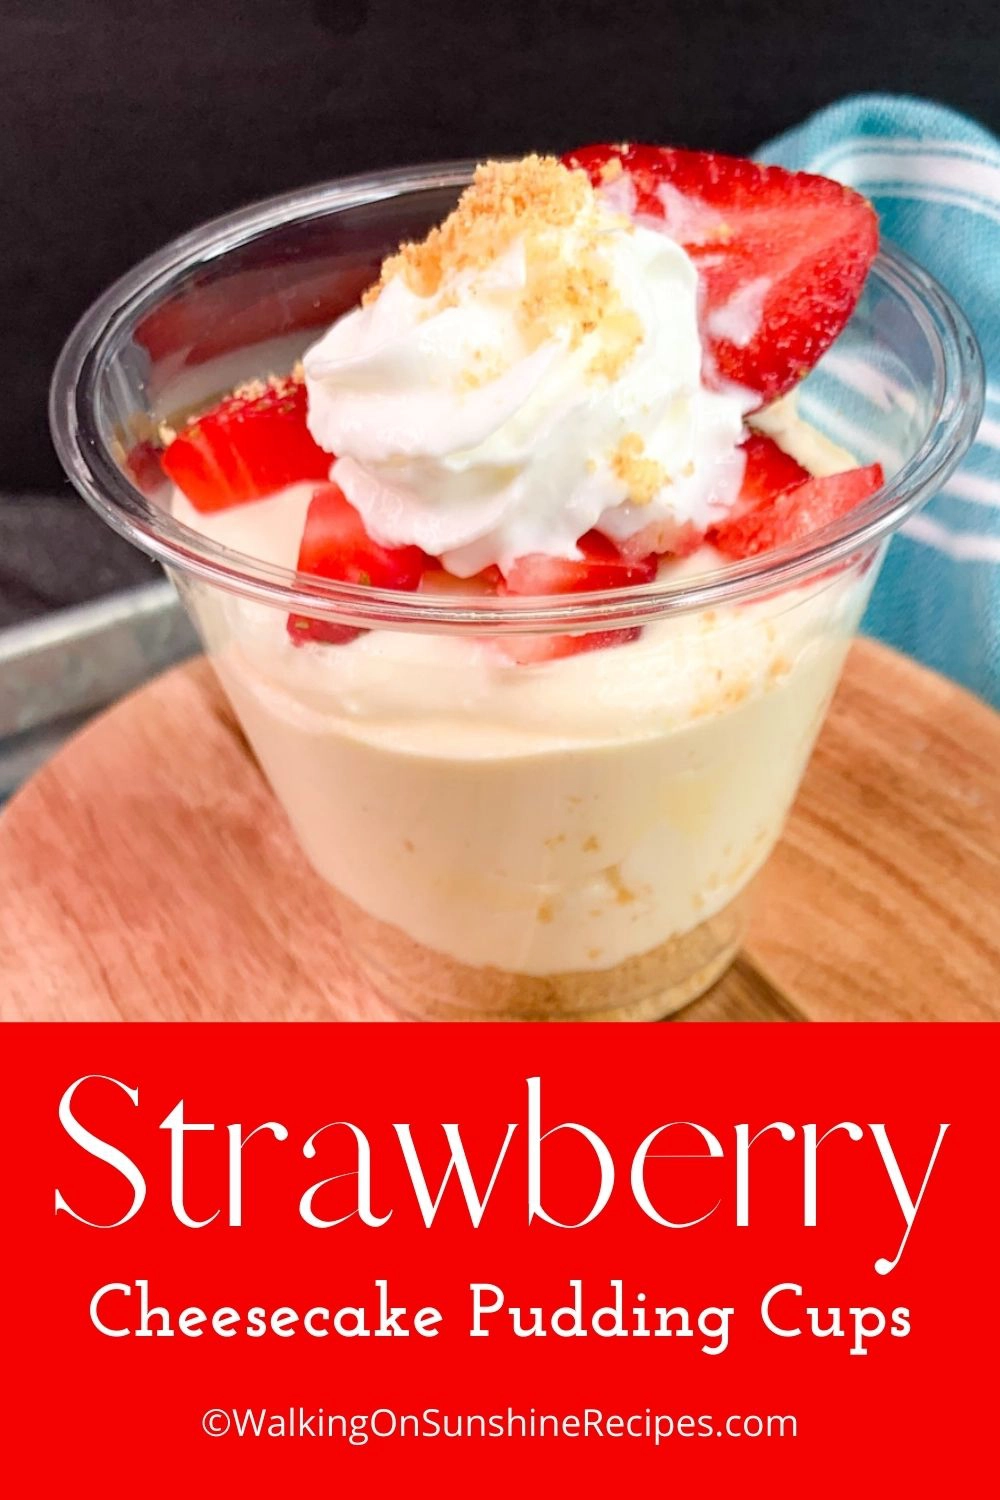 Cheesecake pudding cup topped with strawberries and whipped cream. 